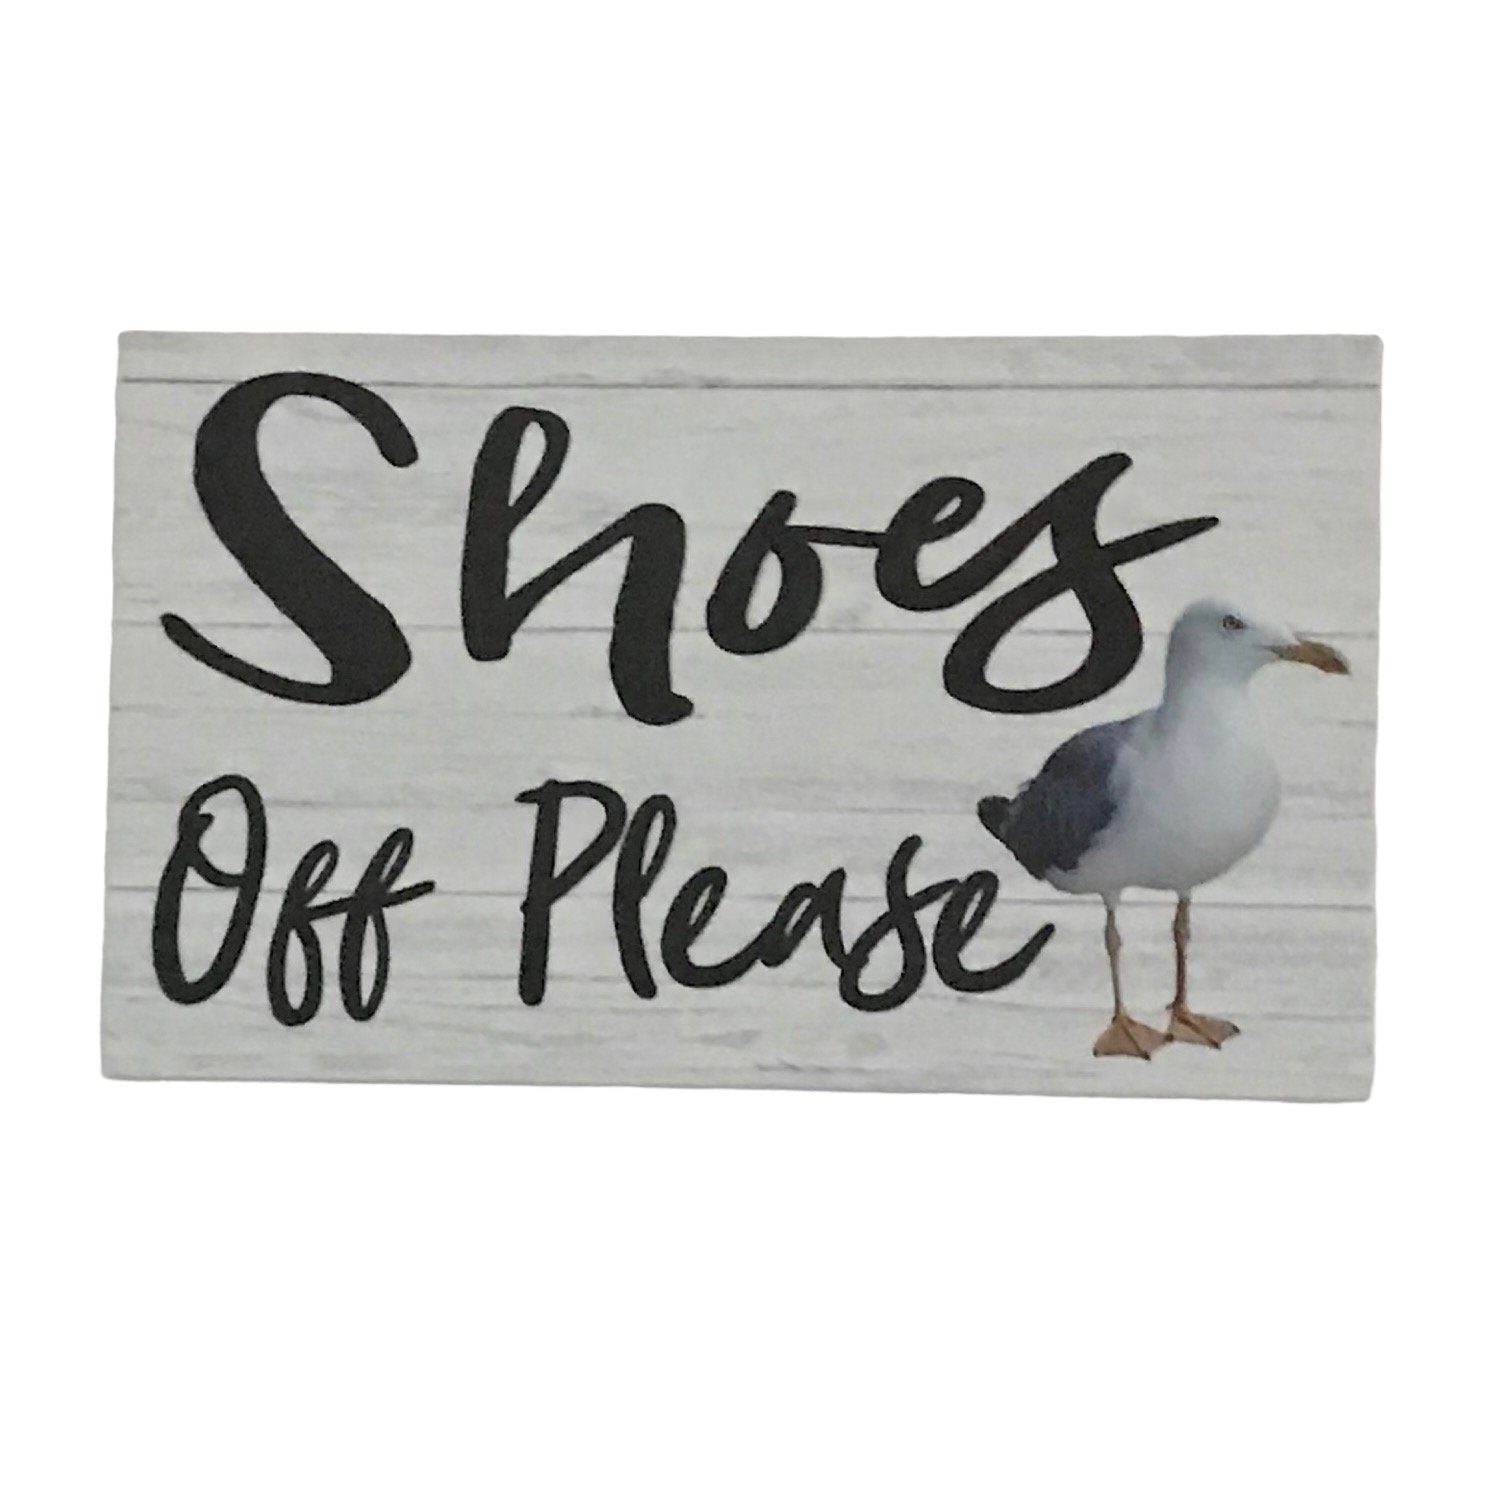 Shoes Off Please with Seagull Sign - The Renmy Store Homewares & Gifts 